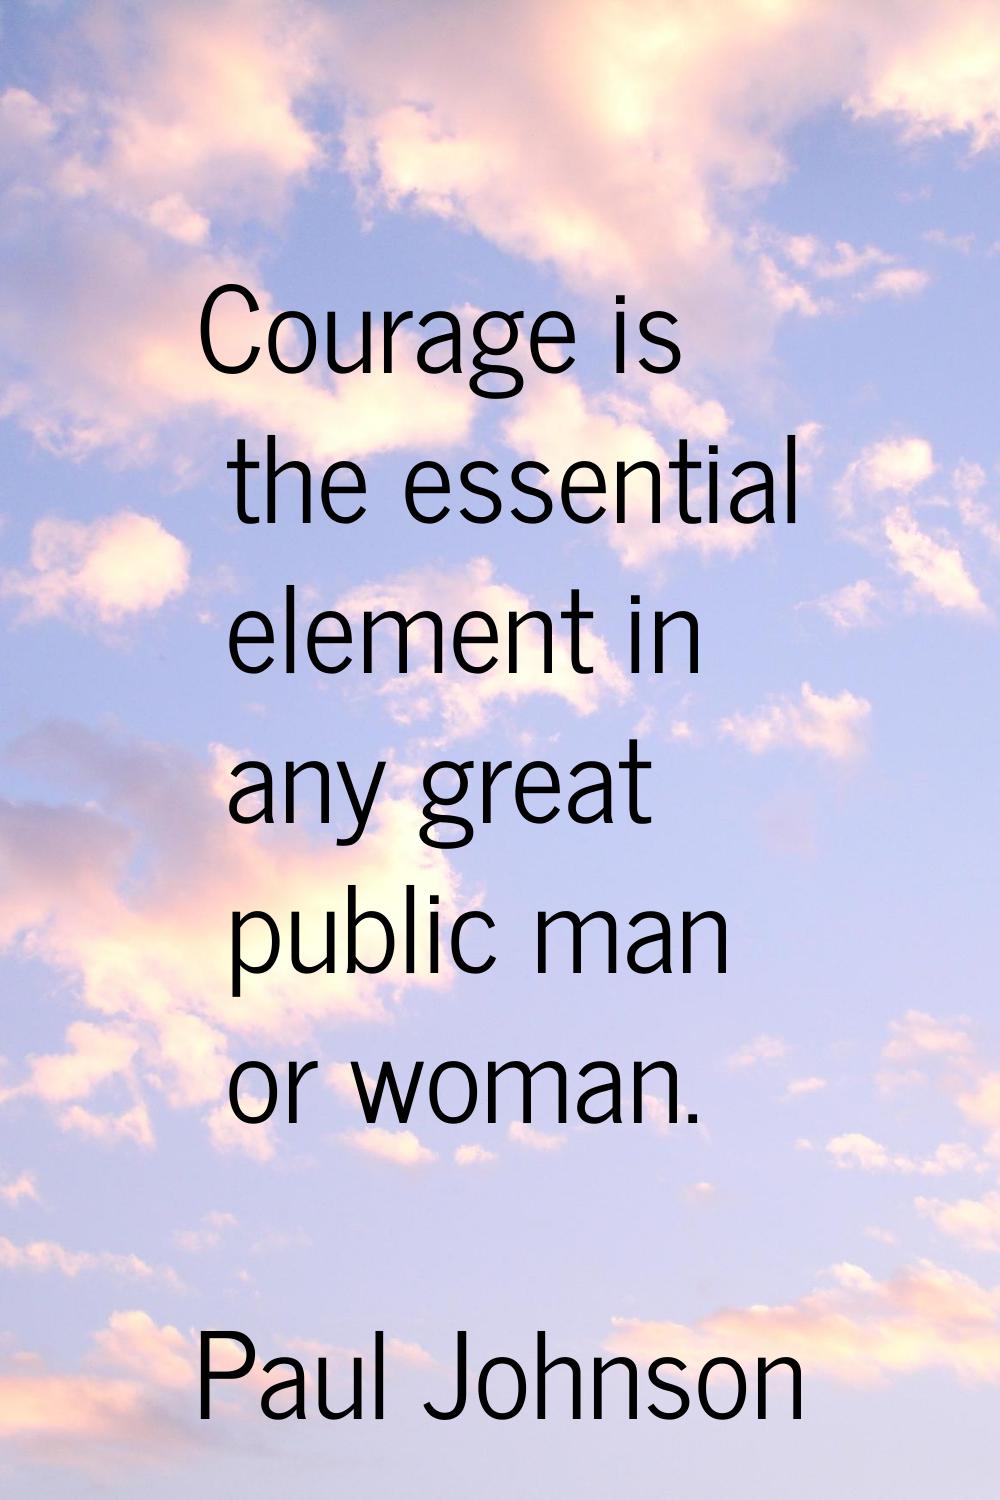 Courage is the essential element in any great public man or woman.